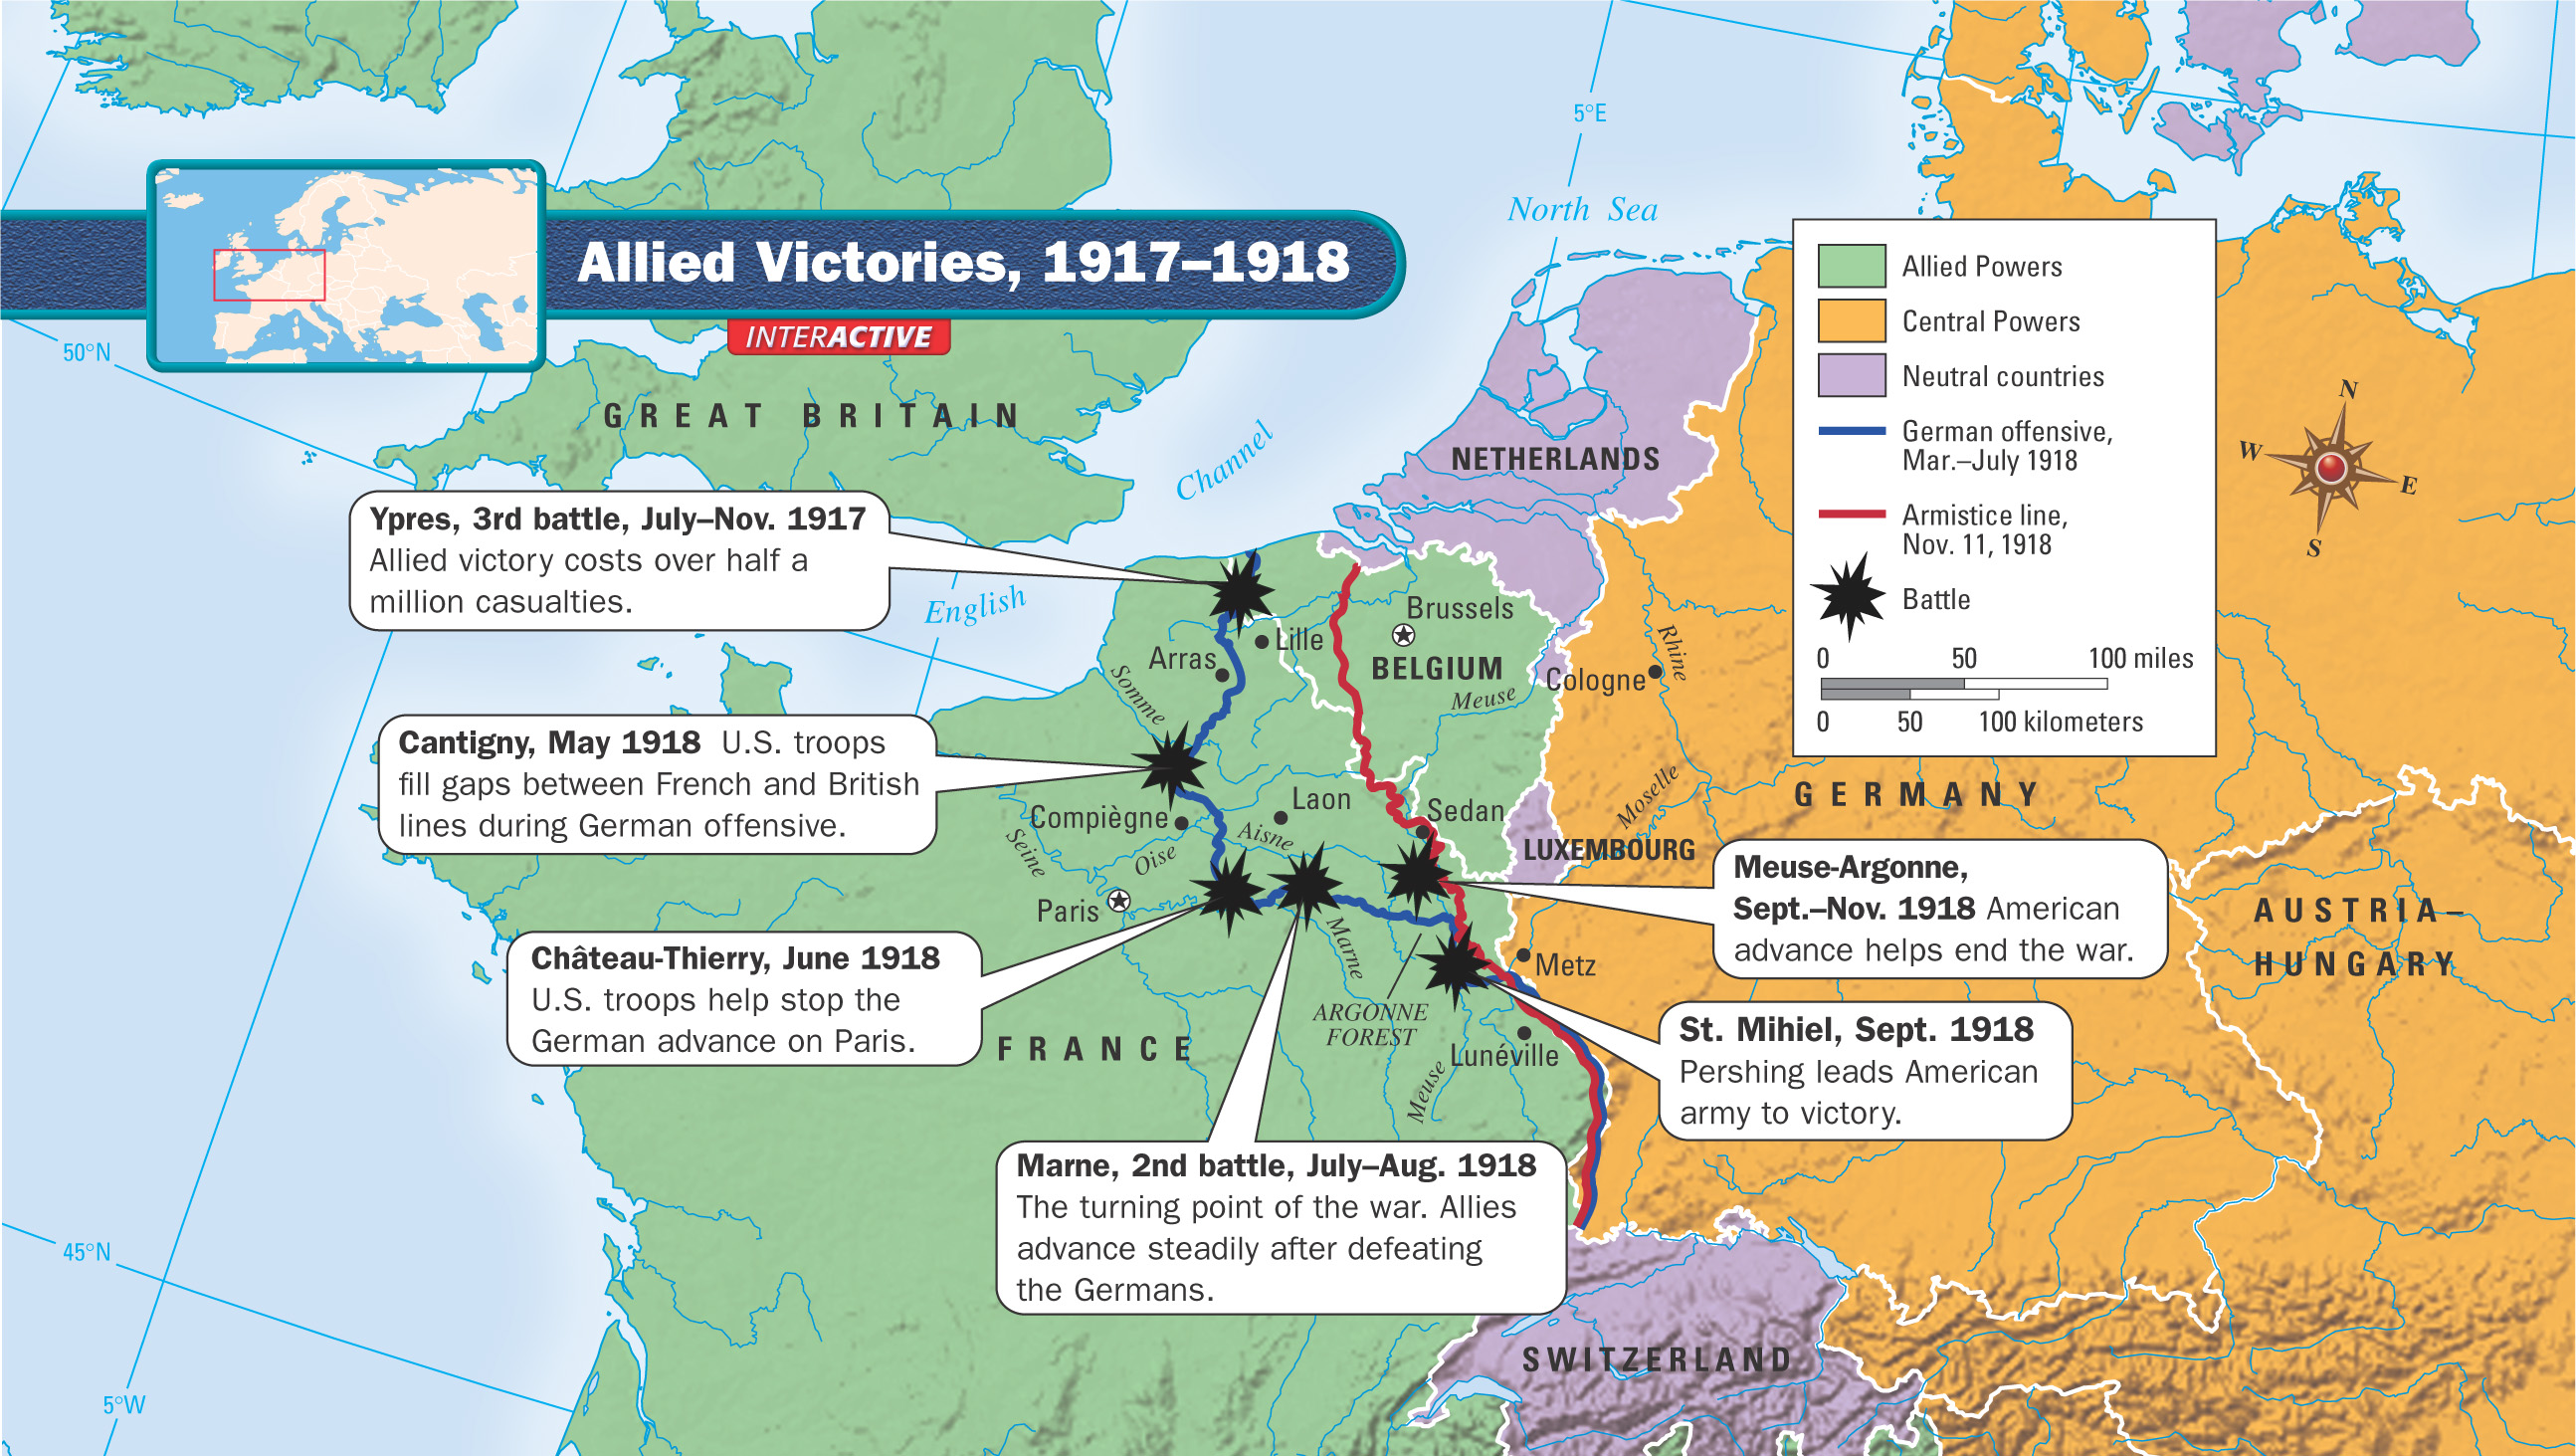 Map of Europe: shows Allied Victories 1917 - 1918: 6 battles in northeastern France along the German offensive line and the Armistice line